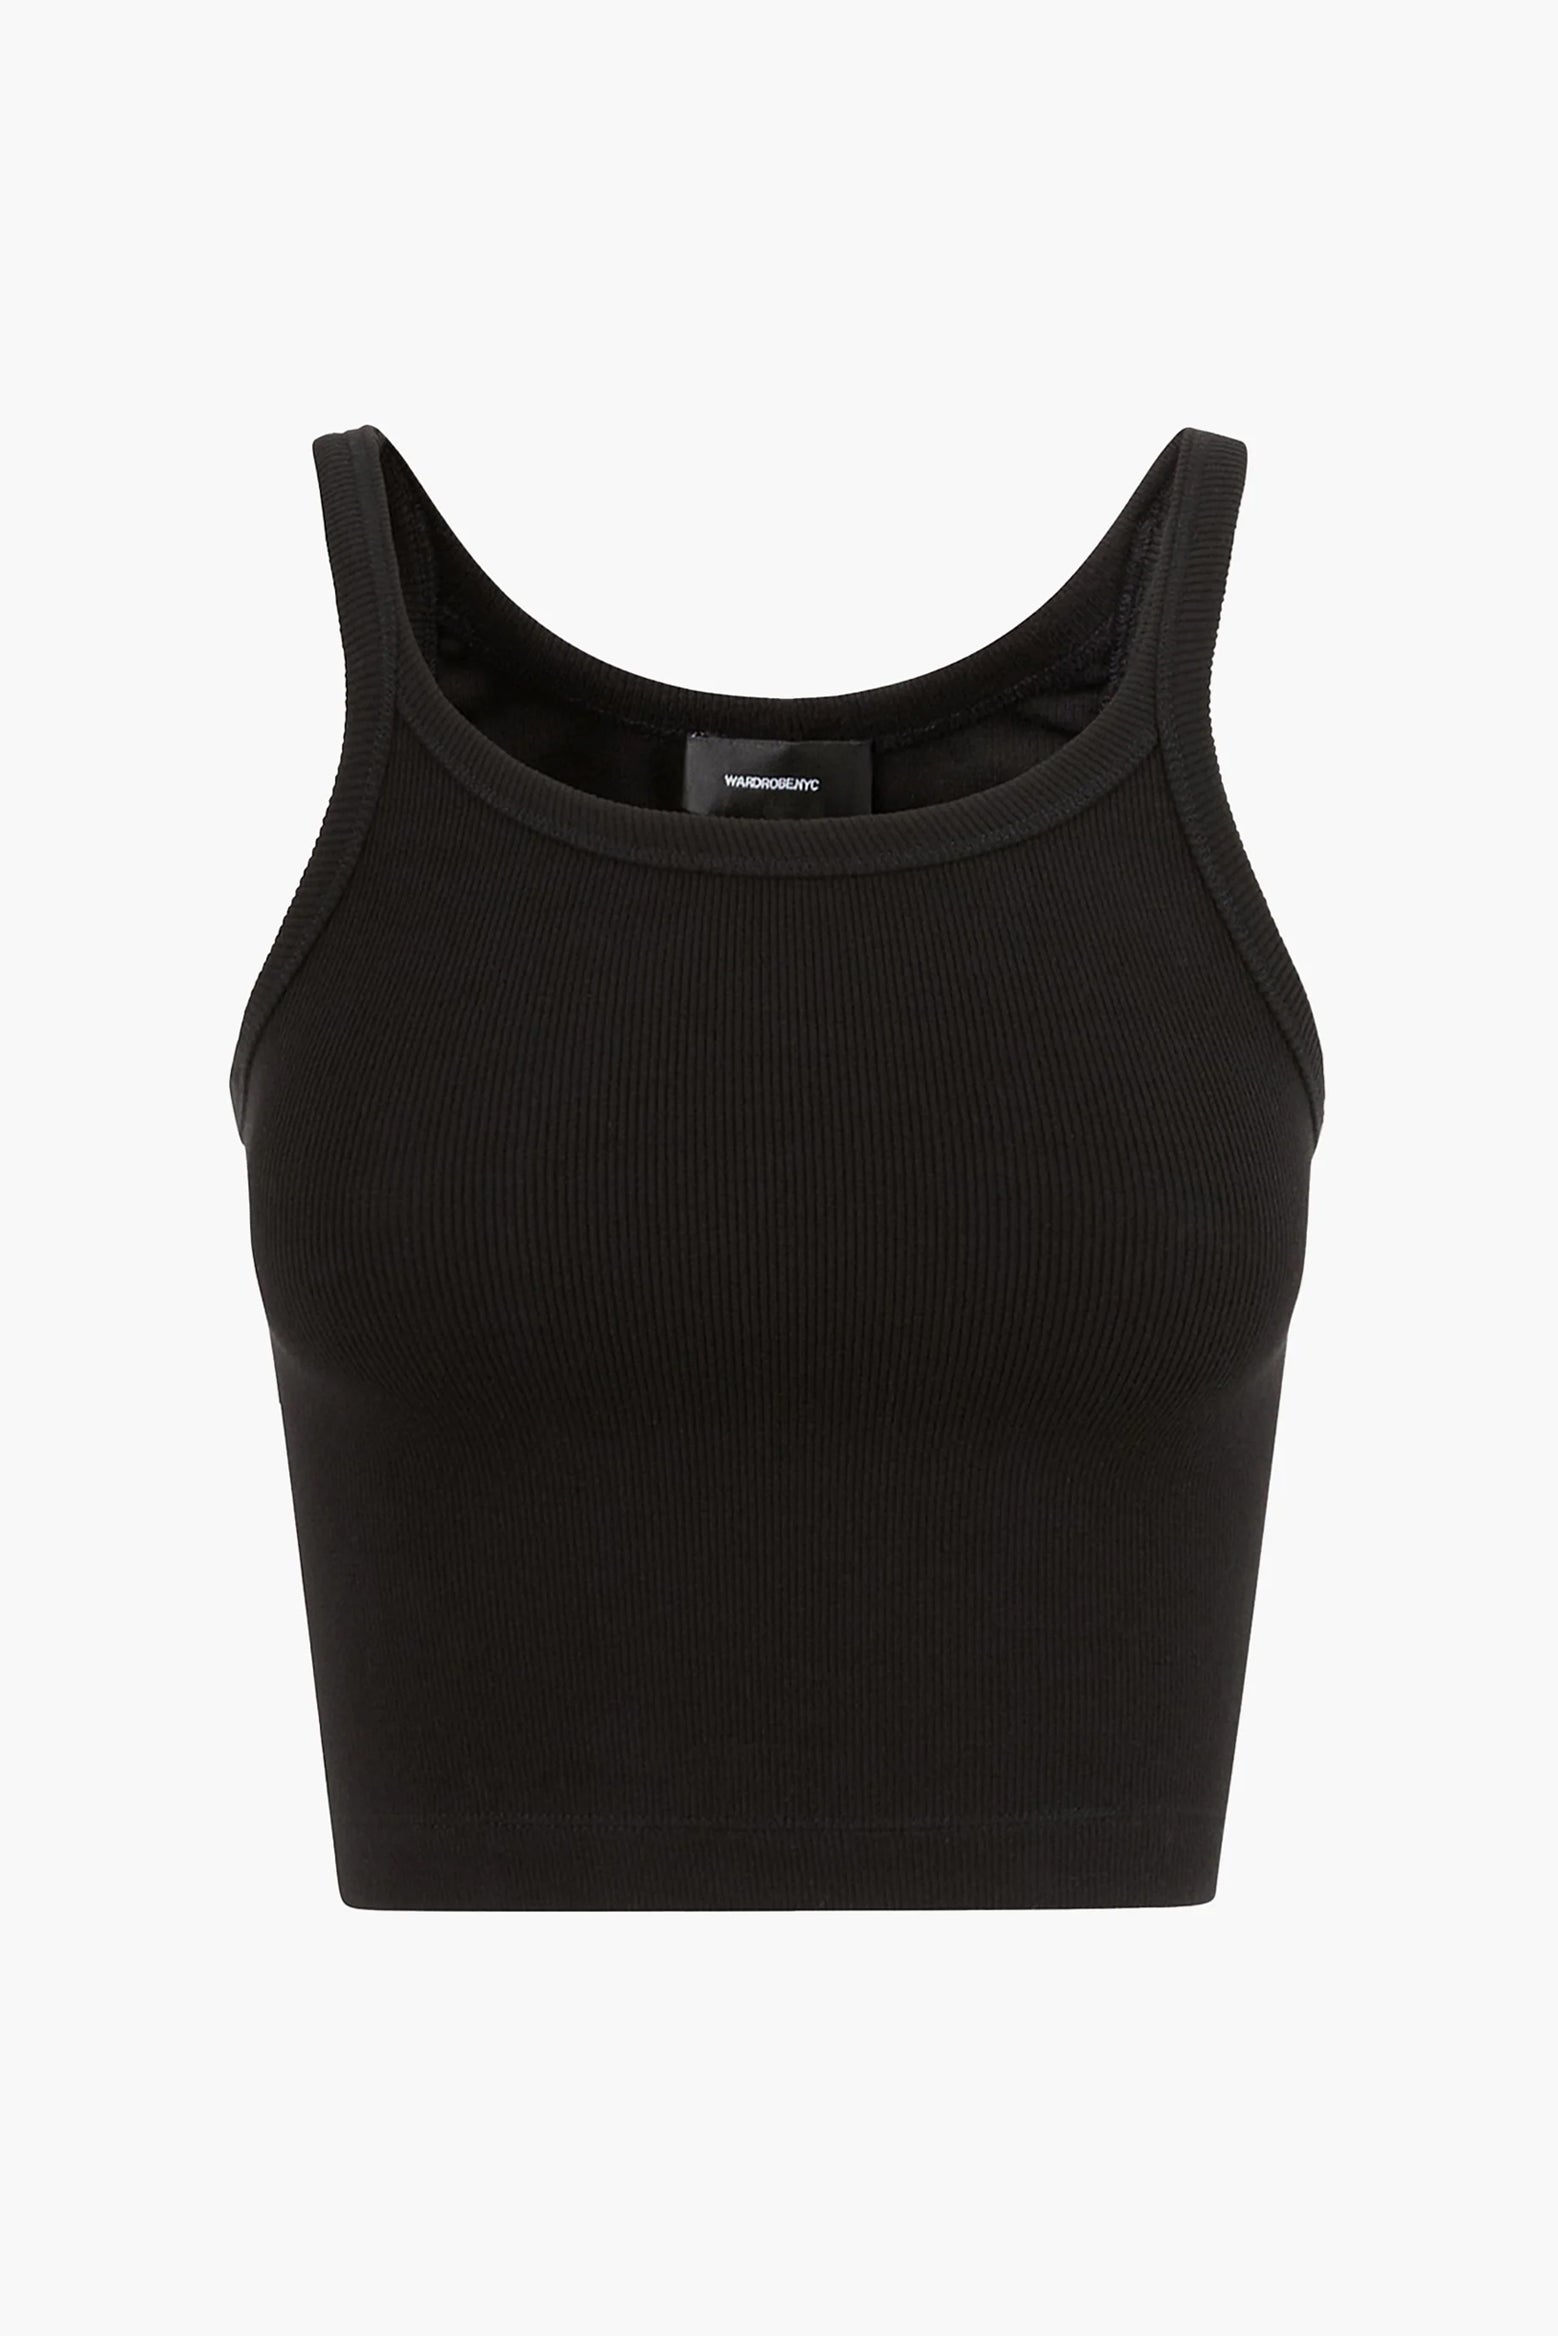 The Wardrobe NYC HB Ribbed Tank in Black available at The New Trend Australia